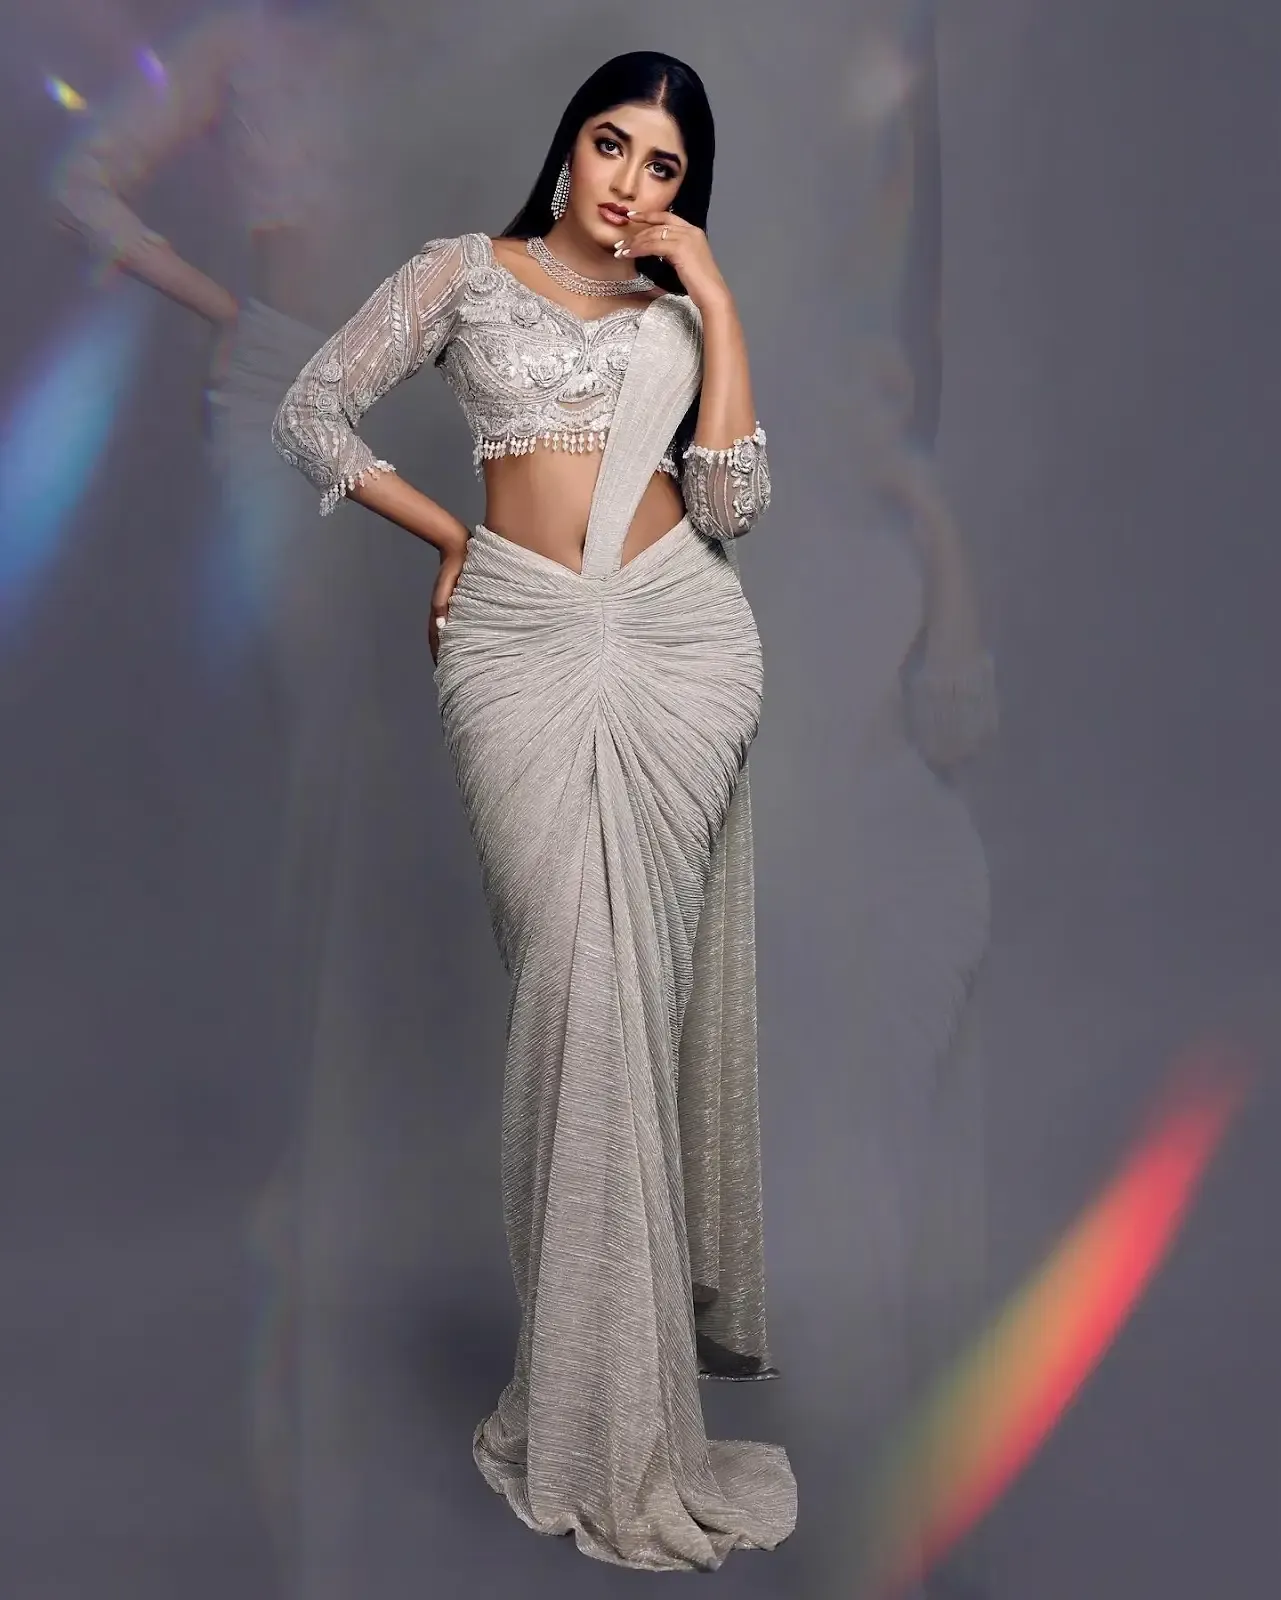 TOLLYWOOD ACTRESS DIMPLE HAYATHI IMAGES IN WHITE SAREE 9